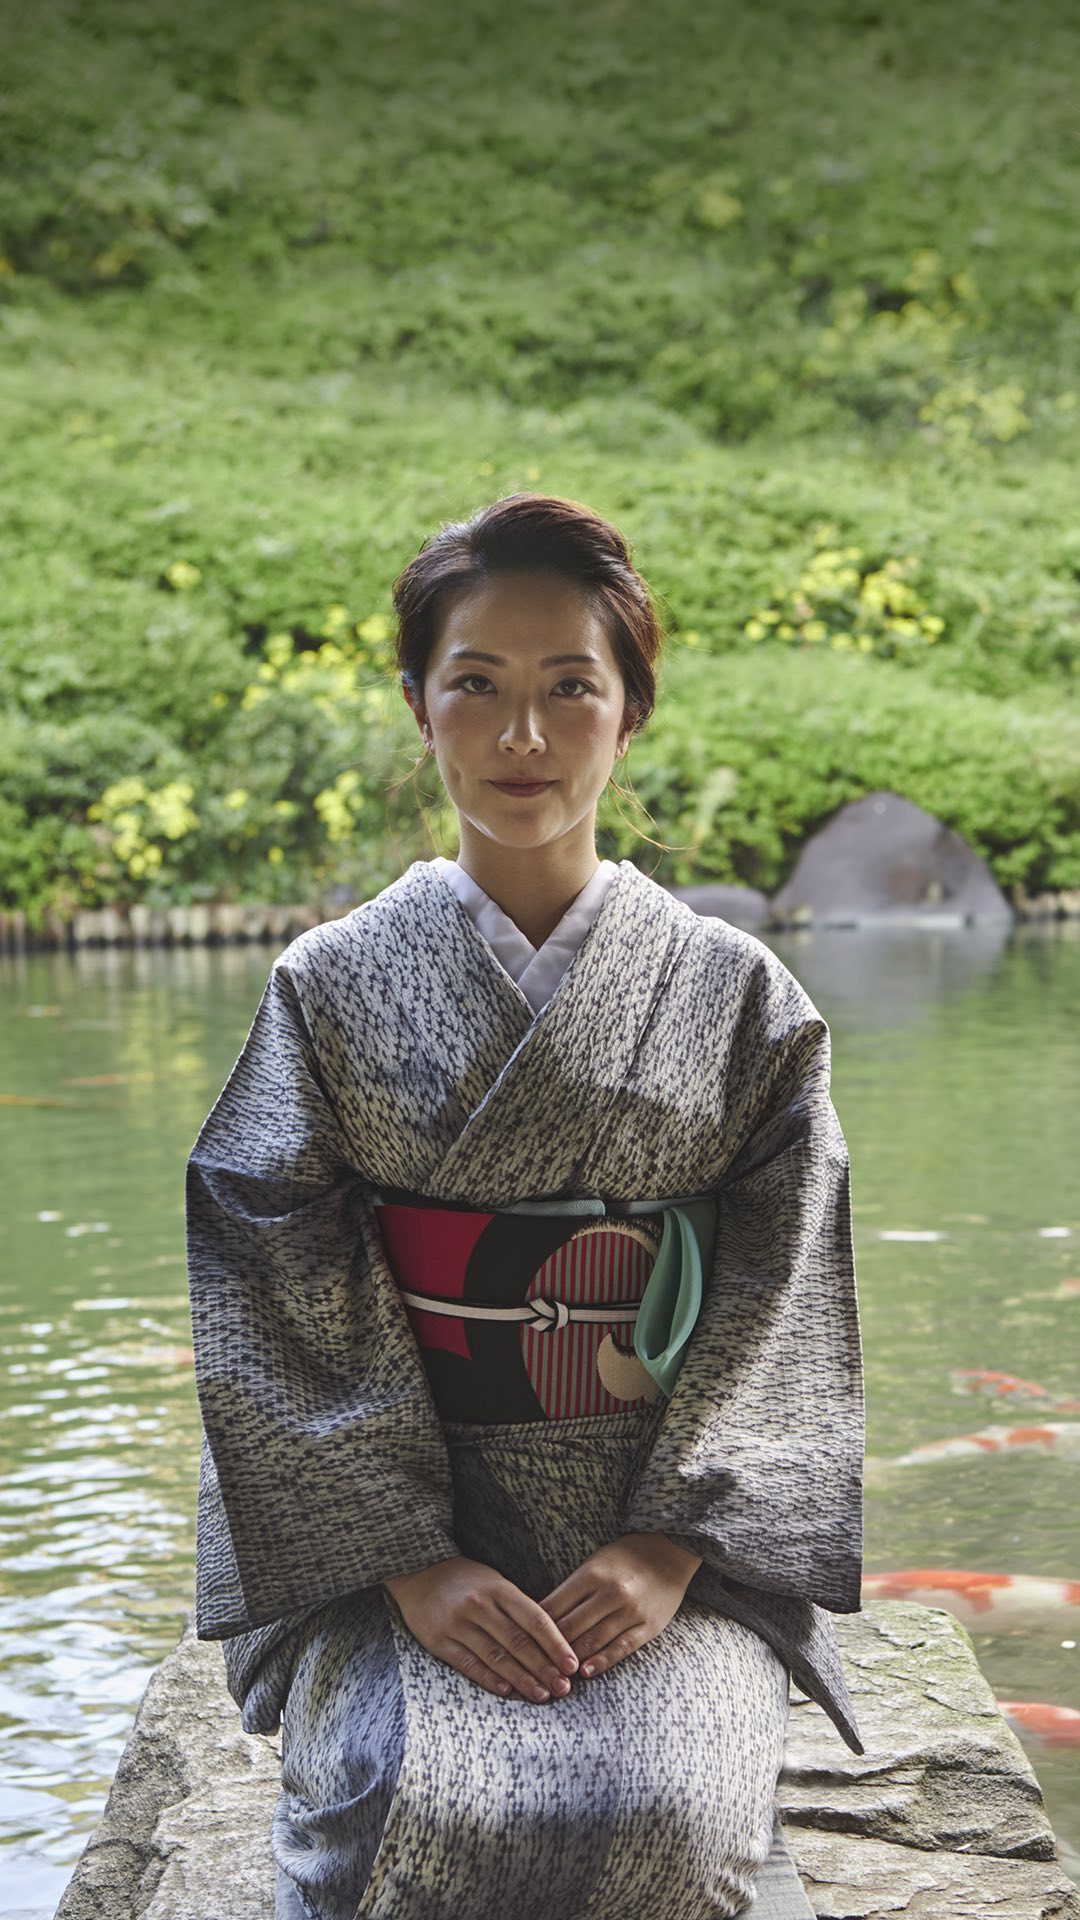 Armani beauty - Tea master Wakako Ikeda and Adria Arjona shared moments by a beautiful lake in Tokyo to conduct a matcha tea ceremony. Their encounter was characterized by a sense of authenticity and...